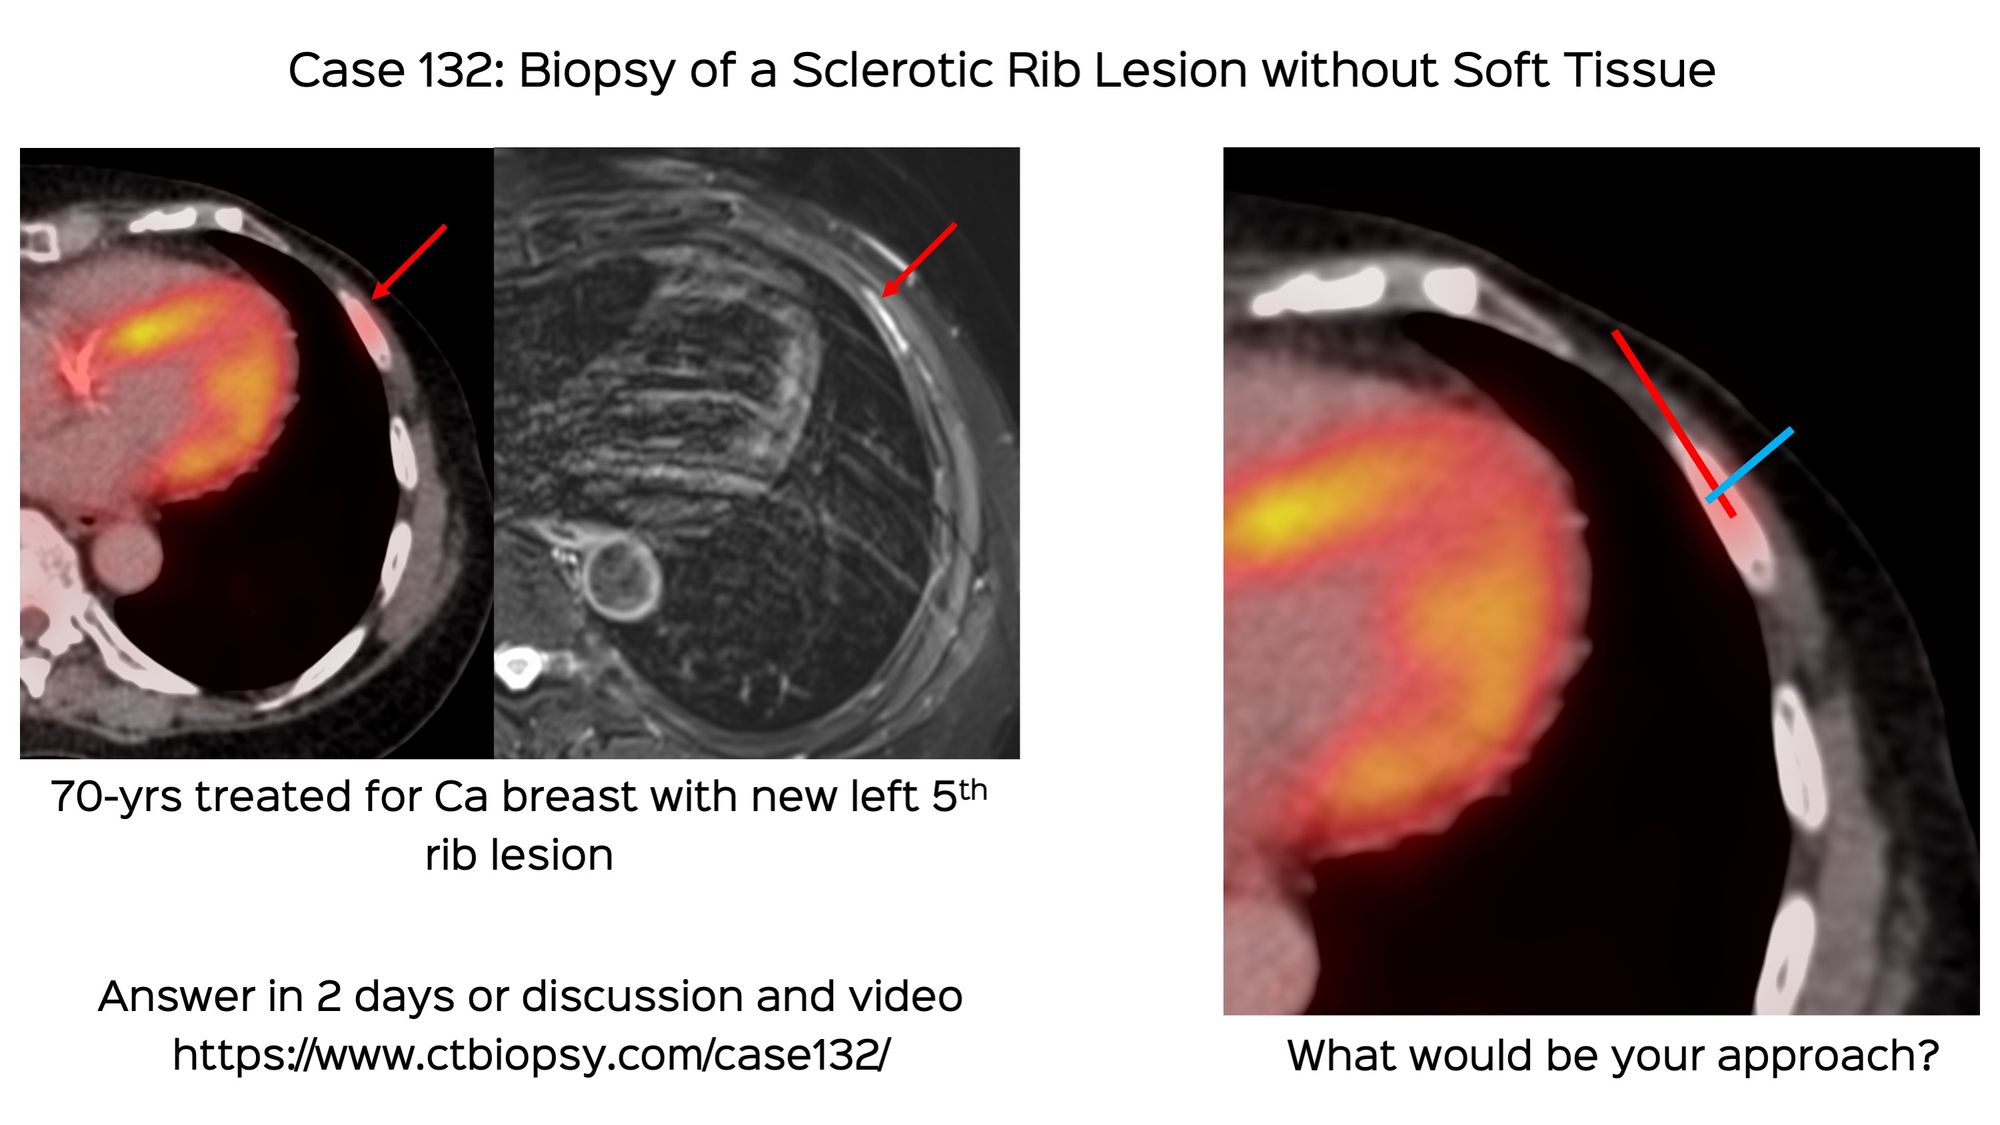 Case 132: Biopsy of a Sclerotic Rib Lesion without Soft Tissue